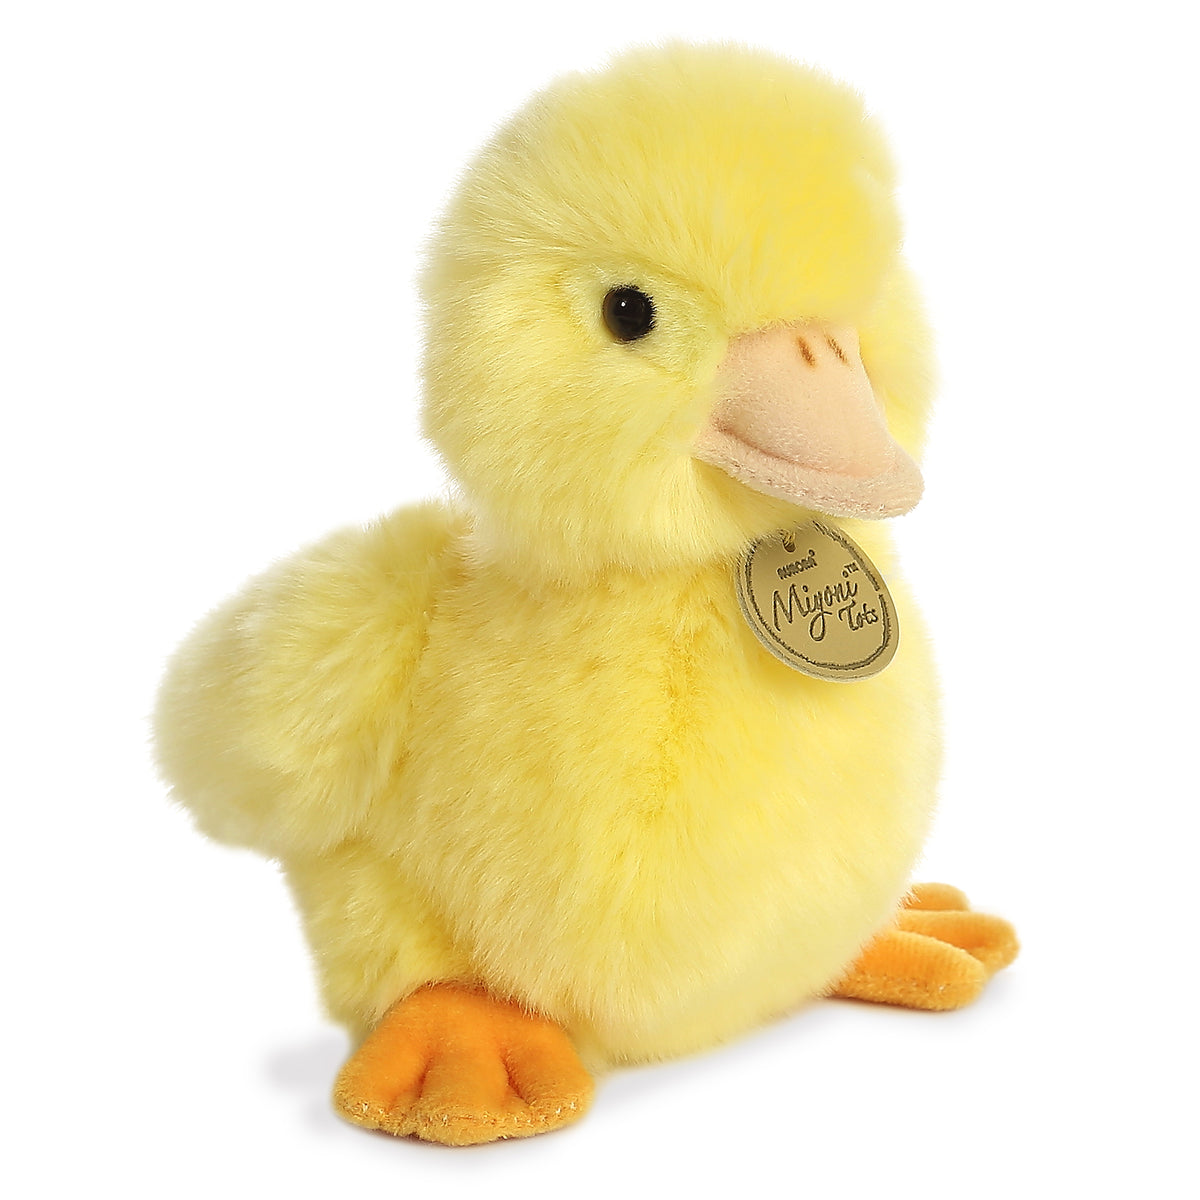 Miyoni Duckling plush by Aurora, featuring fluffy yellow fur and a sweet expression